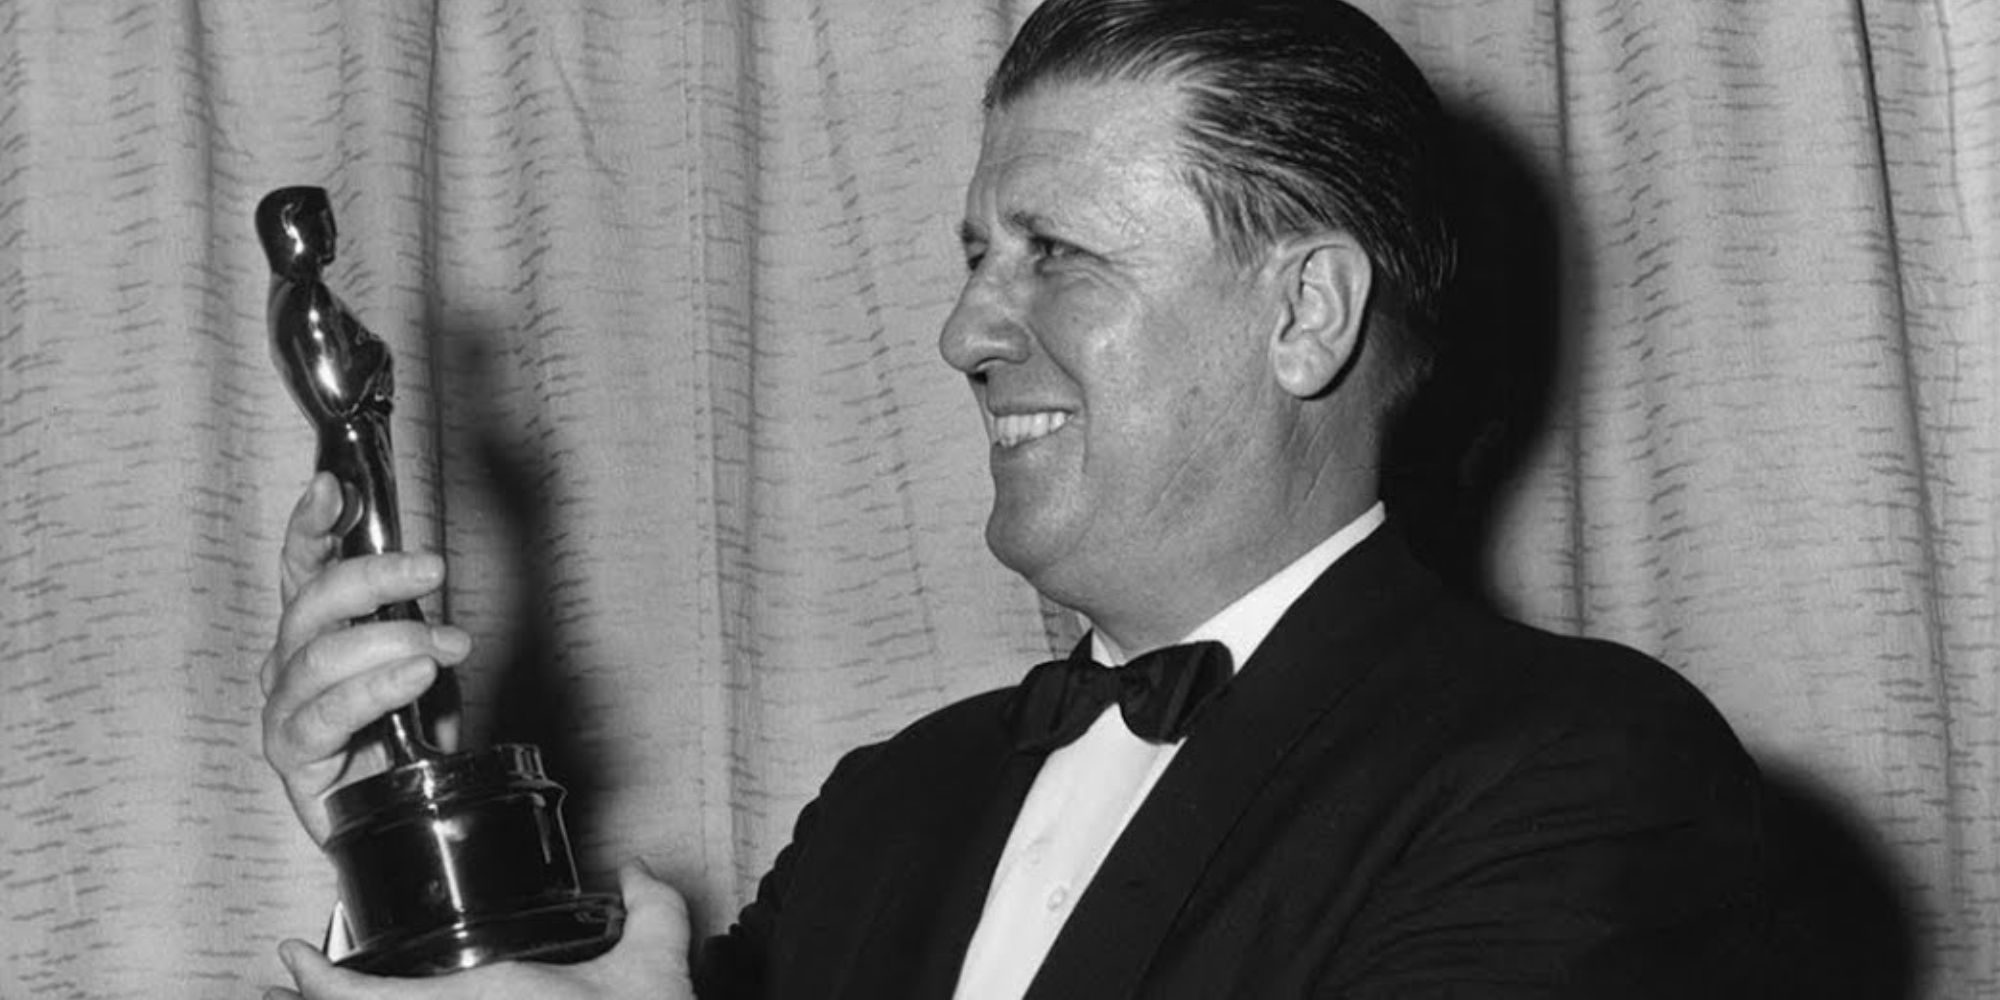 George Stevens with his Oscar at the 1957 Academy Awards via The Academy of Motion Pictures and Science